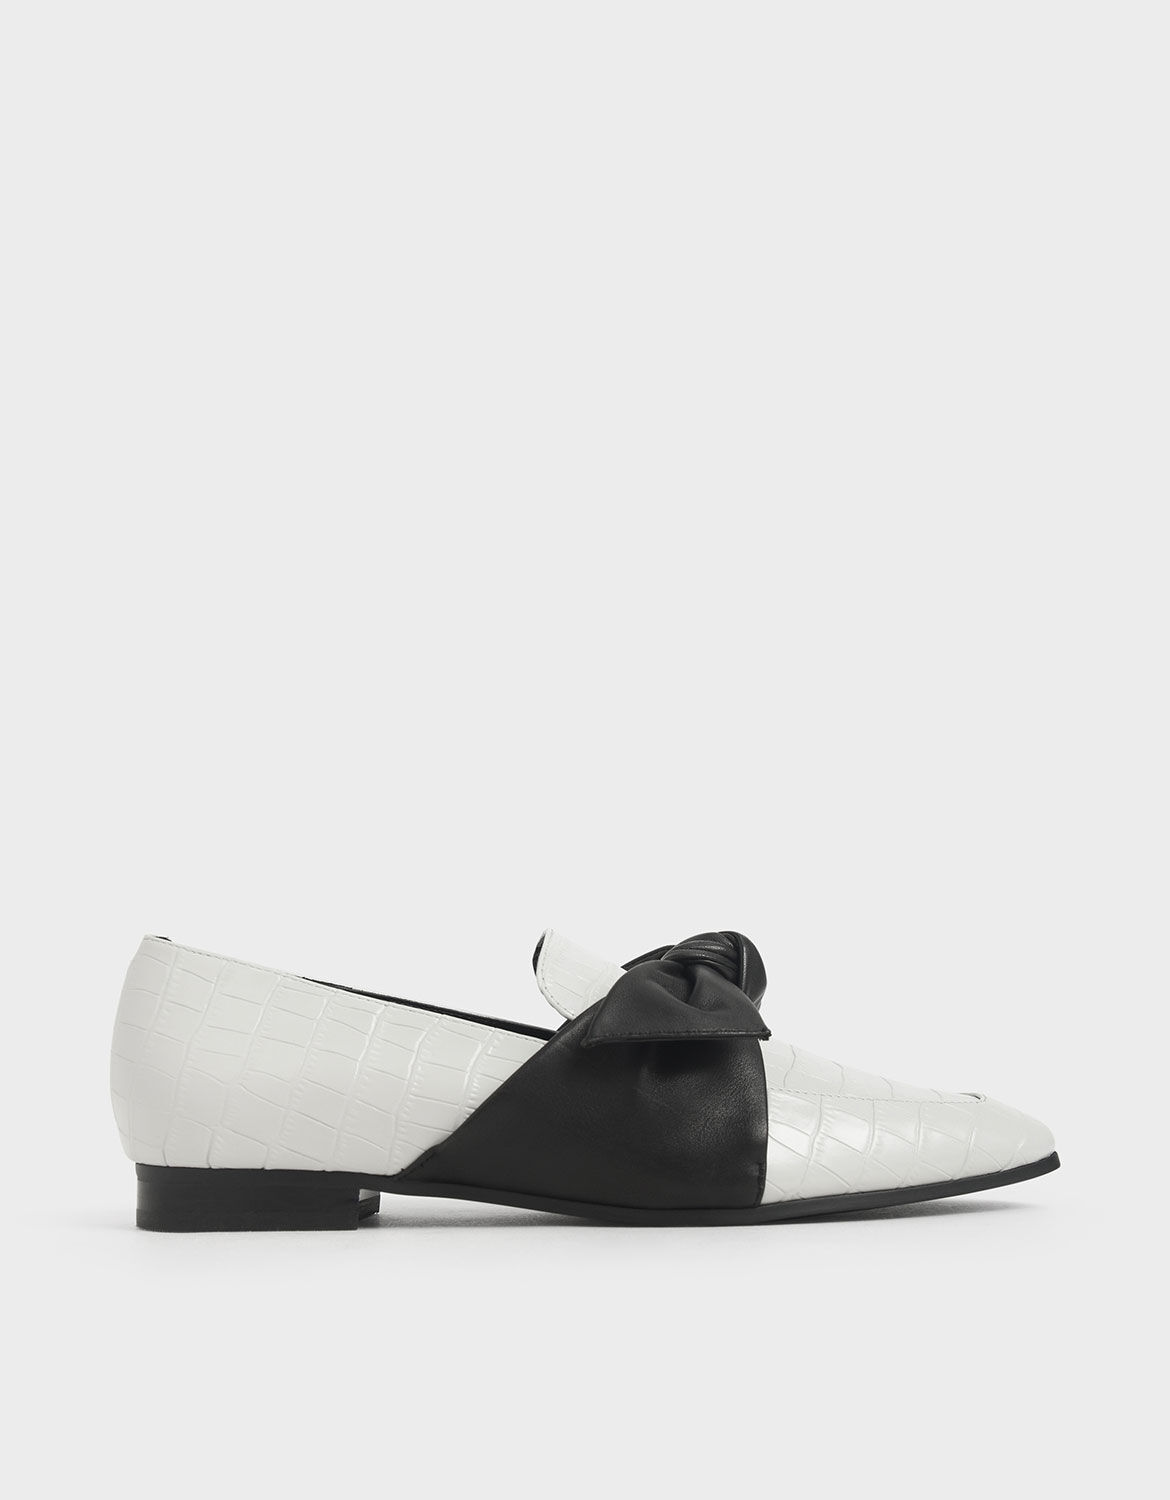 white croc loafers